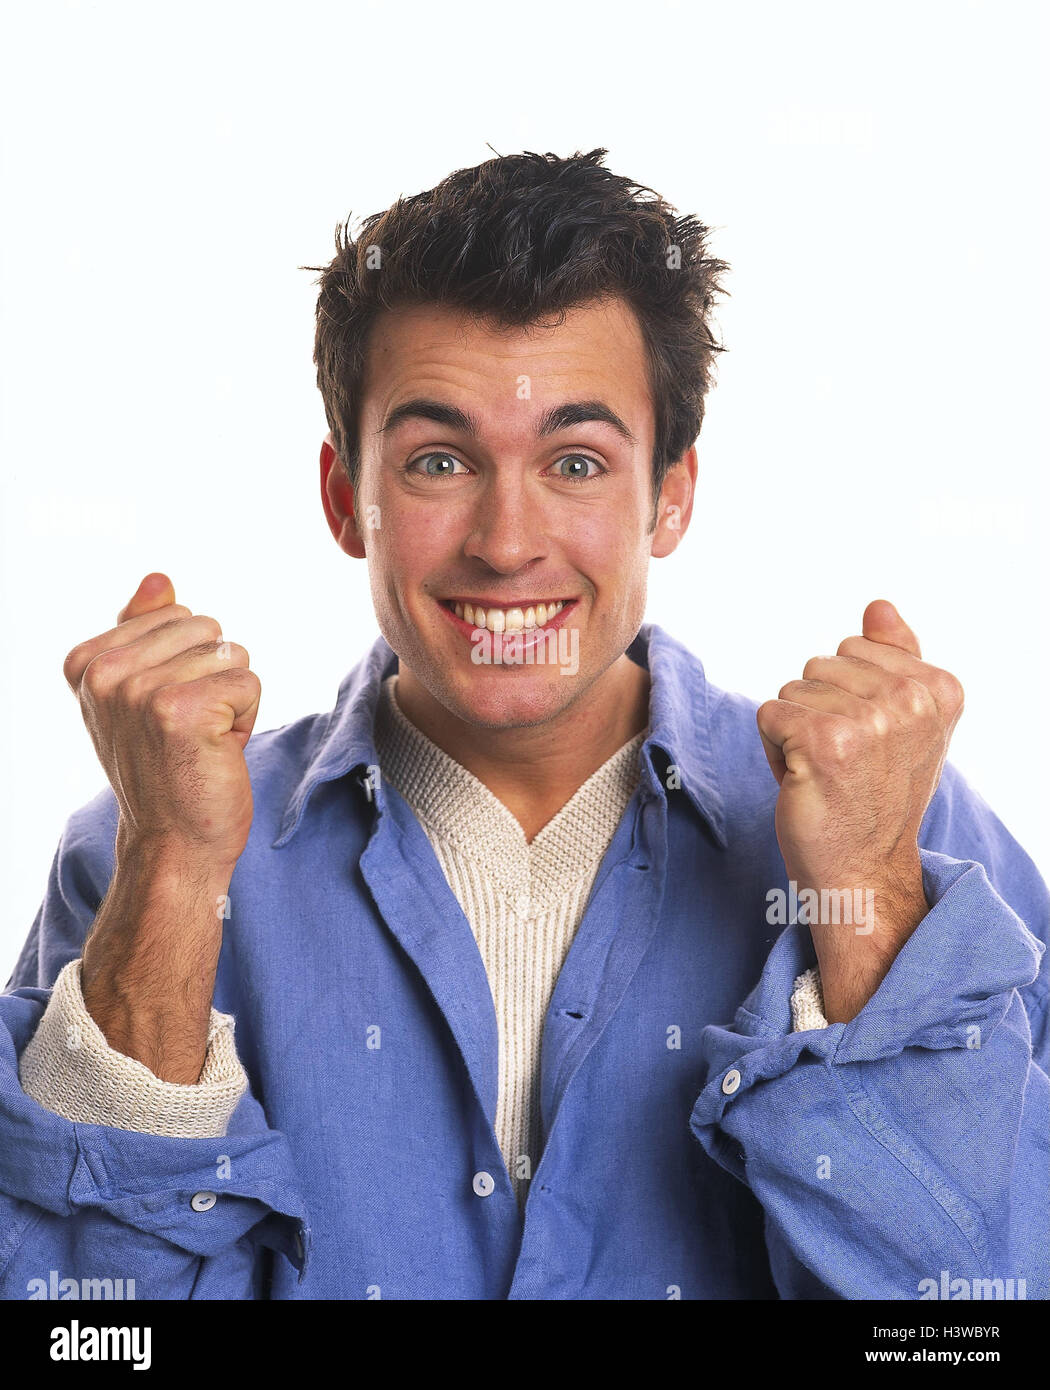 Man, young, gesture, joy, cheering Men, shirt, blue, rejoice, please, pleases, triumph, cheerfully, funnily, happy, success, enthusiasm, studio, cut out, Stock Photo